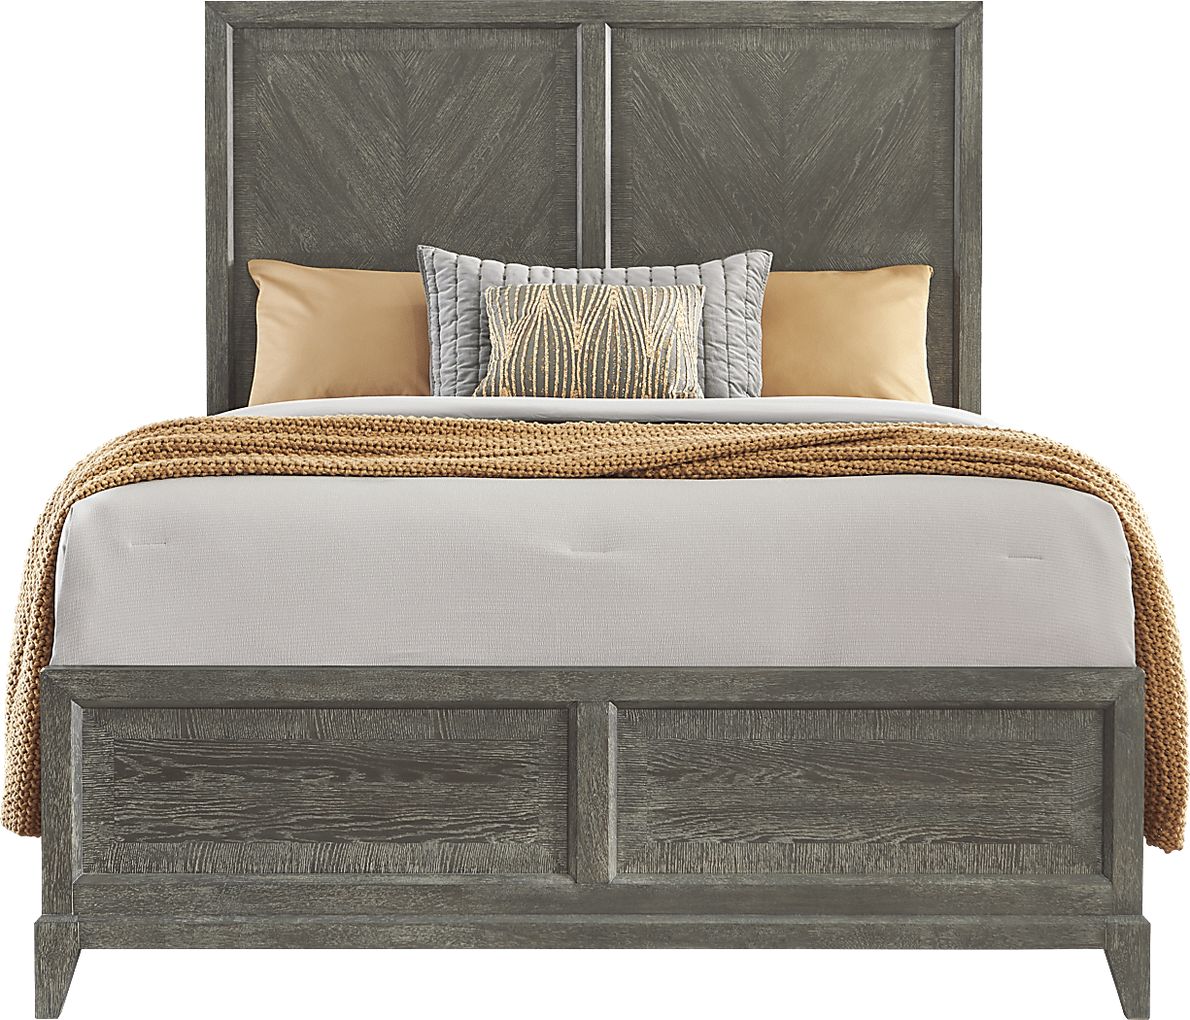 Cindy Crawford Home Kailey Park Charcoal 3 Pc King Panel Bed